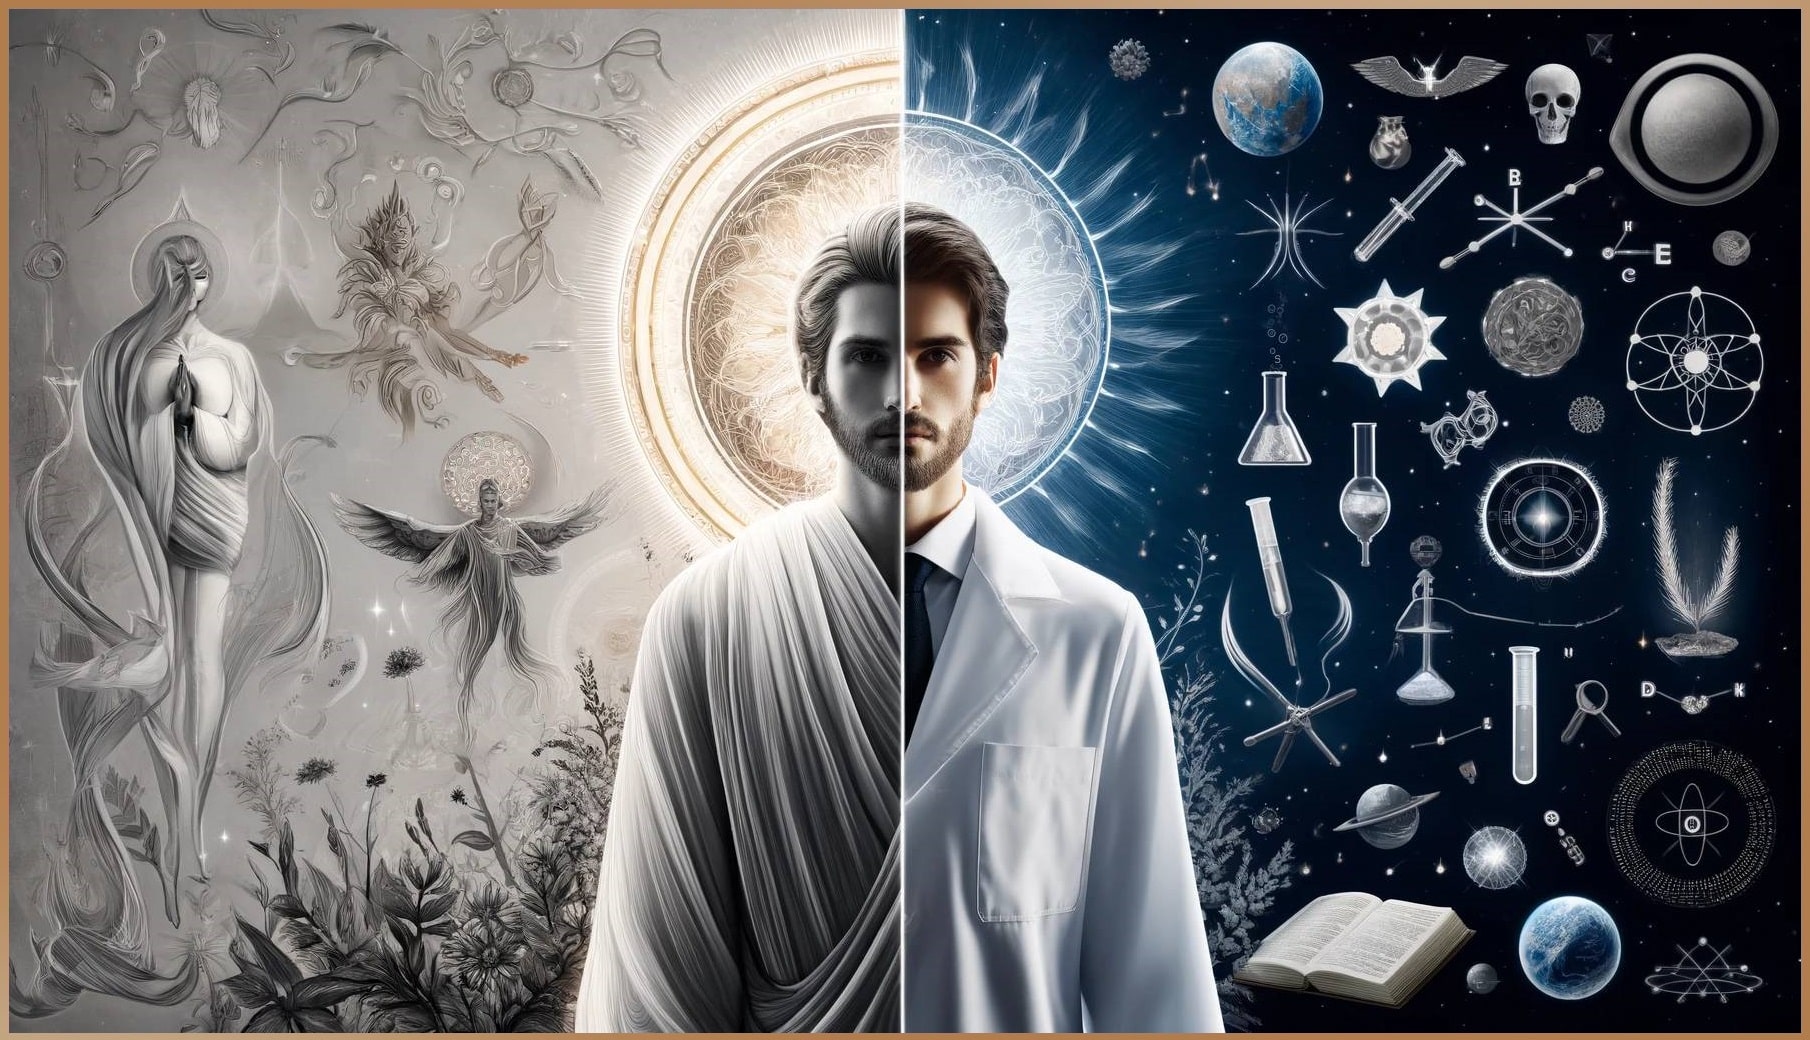 Digital artwork split into two parts; on the left, a grayscale illustration of angelic figures and ethereal energy flows in a nature setting, symbolizing spirituality. On the right, a man in a lab coat representing science stands against a backdrop of cosmic and scientific symbols, from atoms to planets.